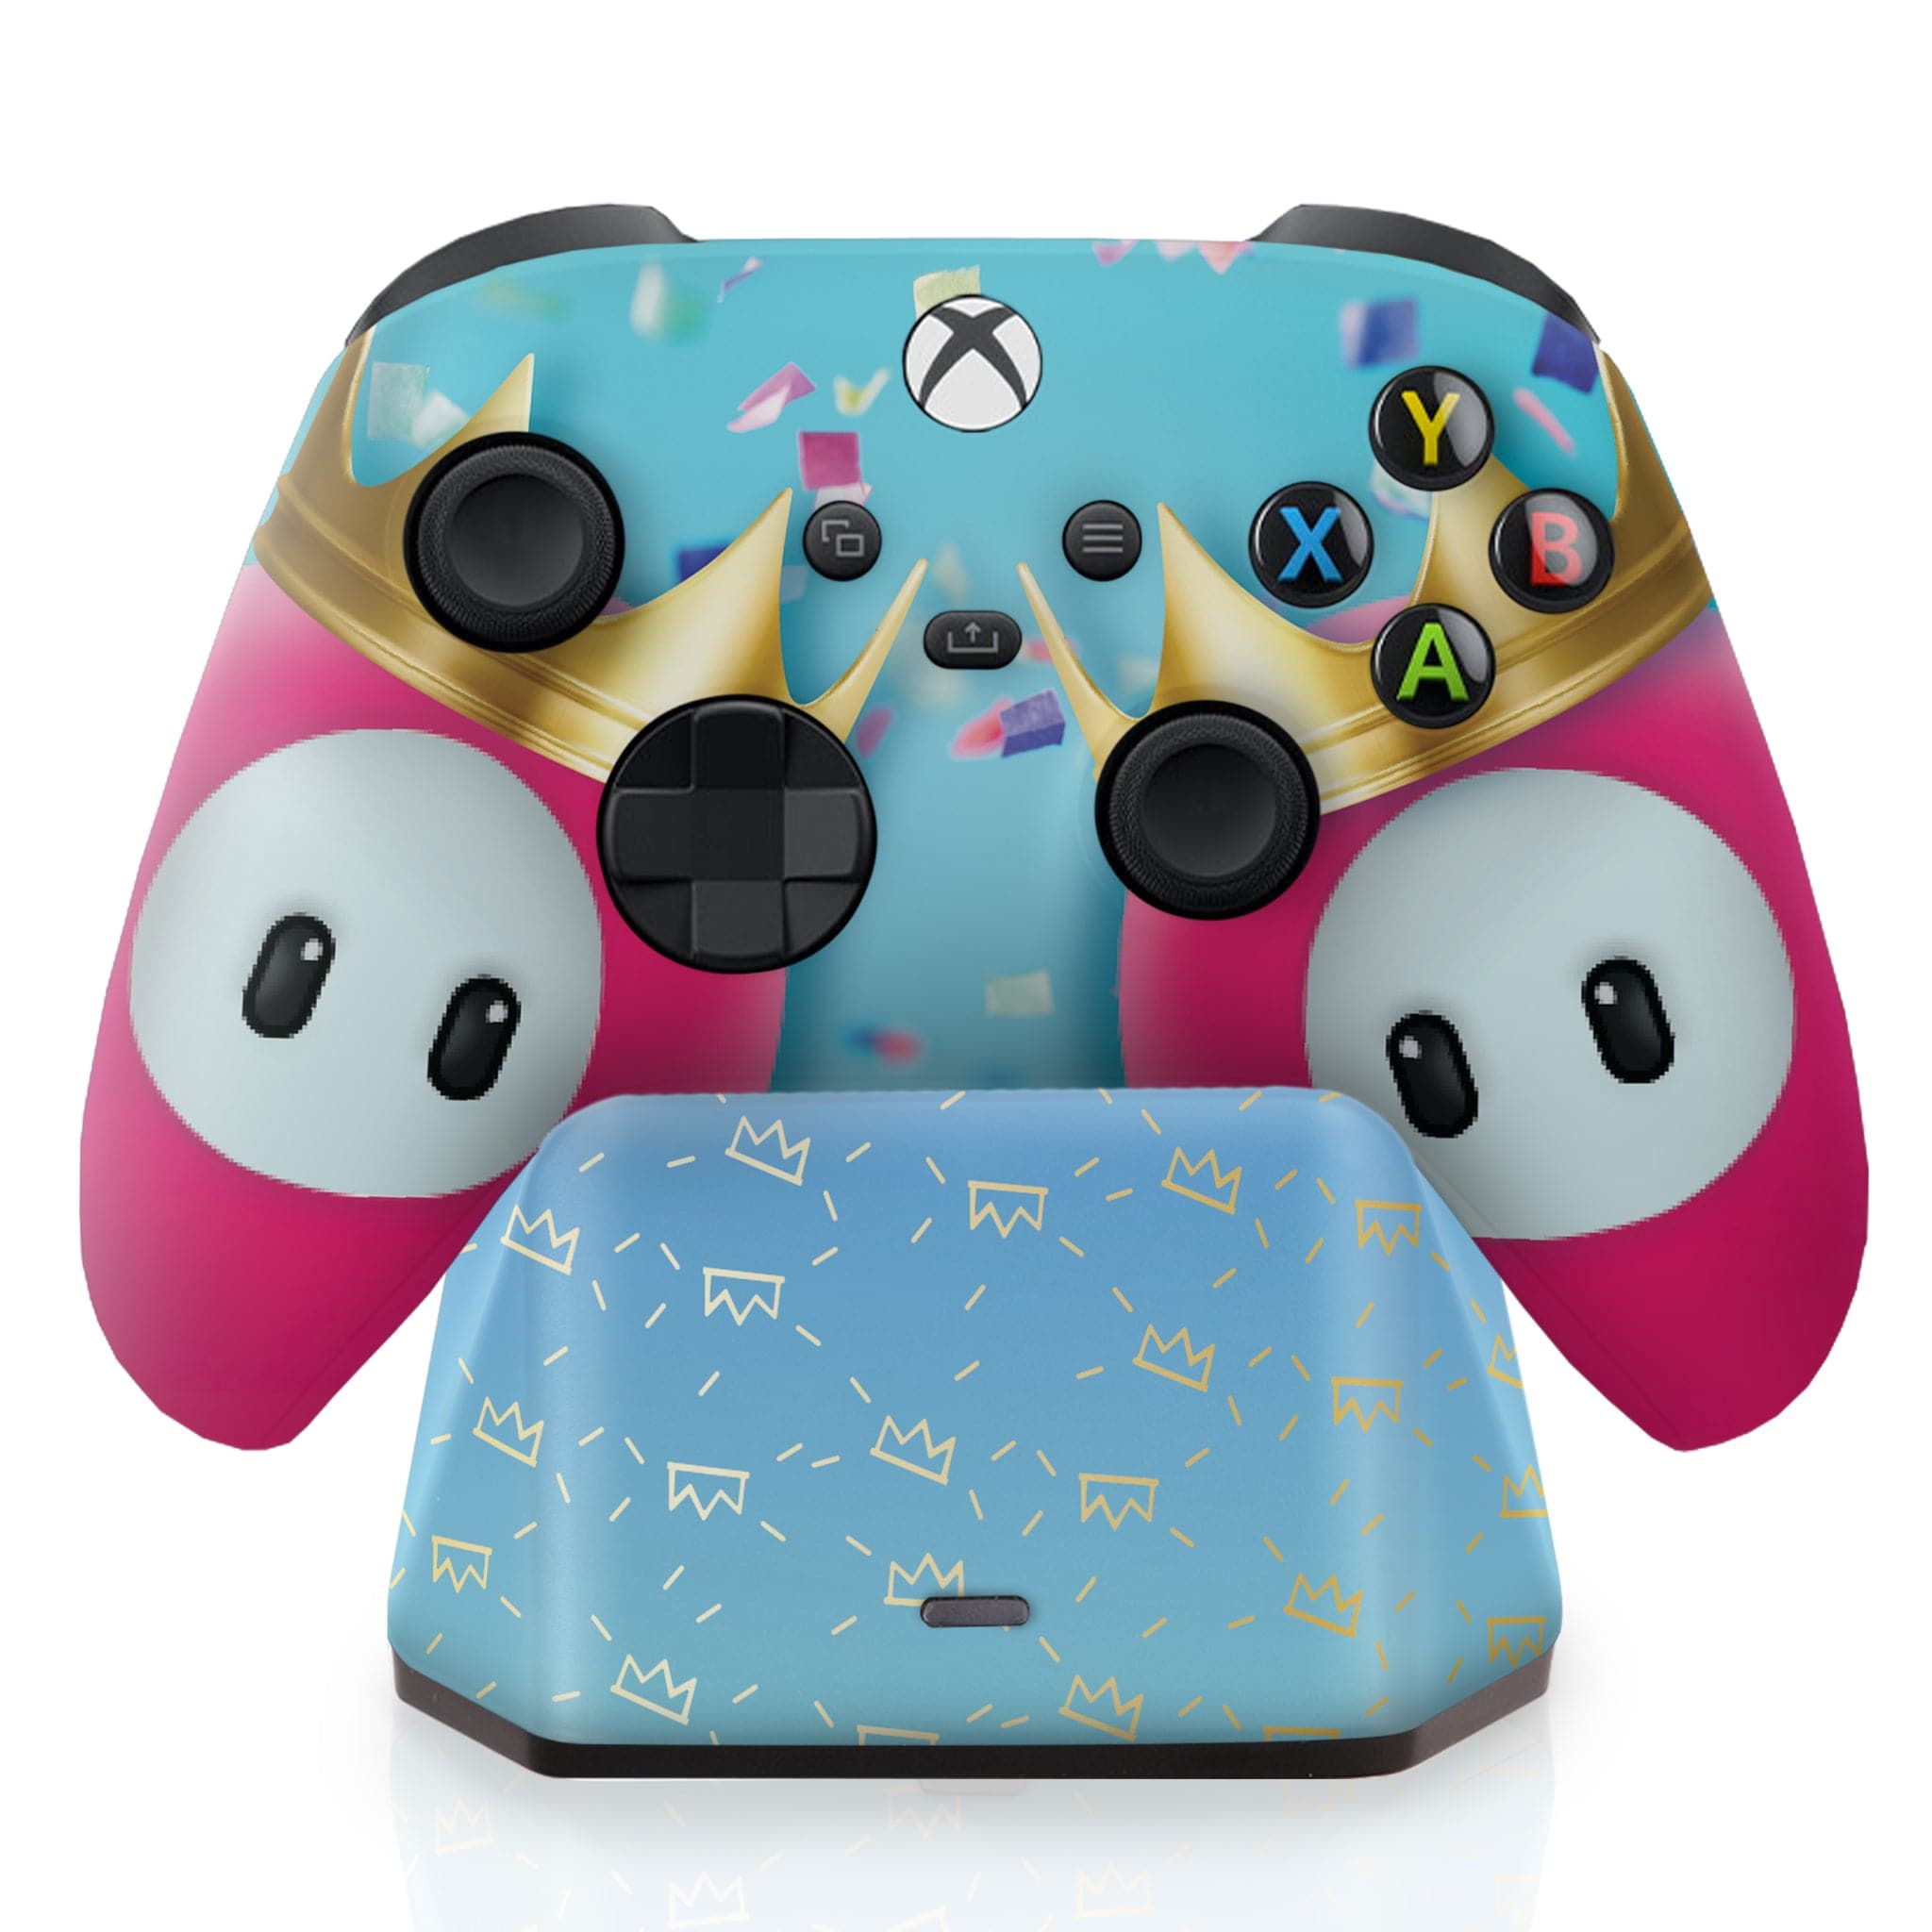 Fall Guys Controller Support